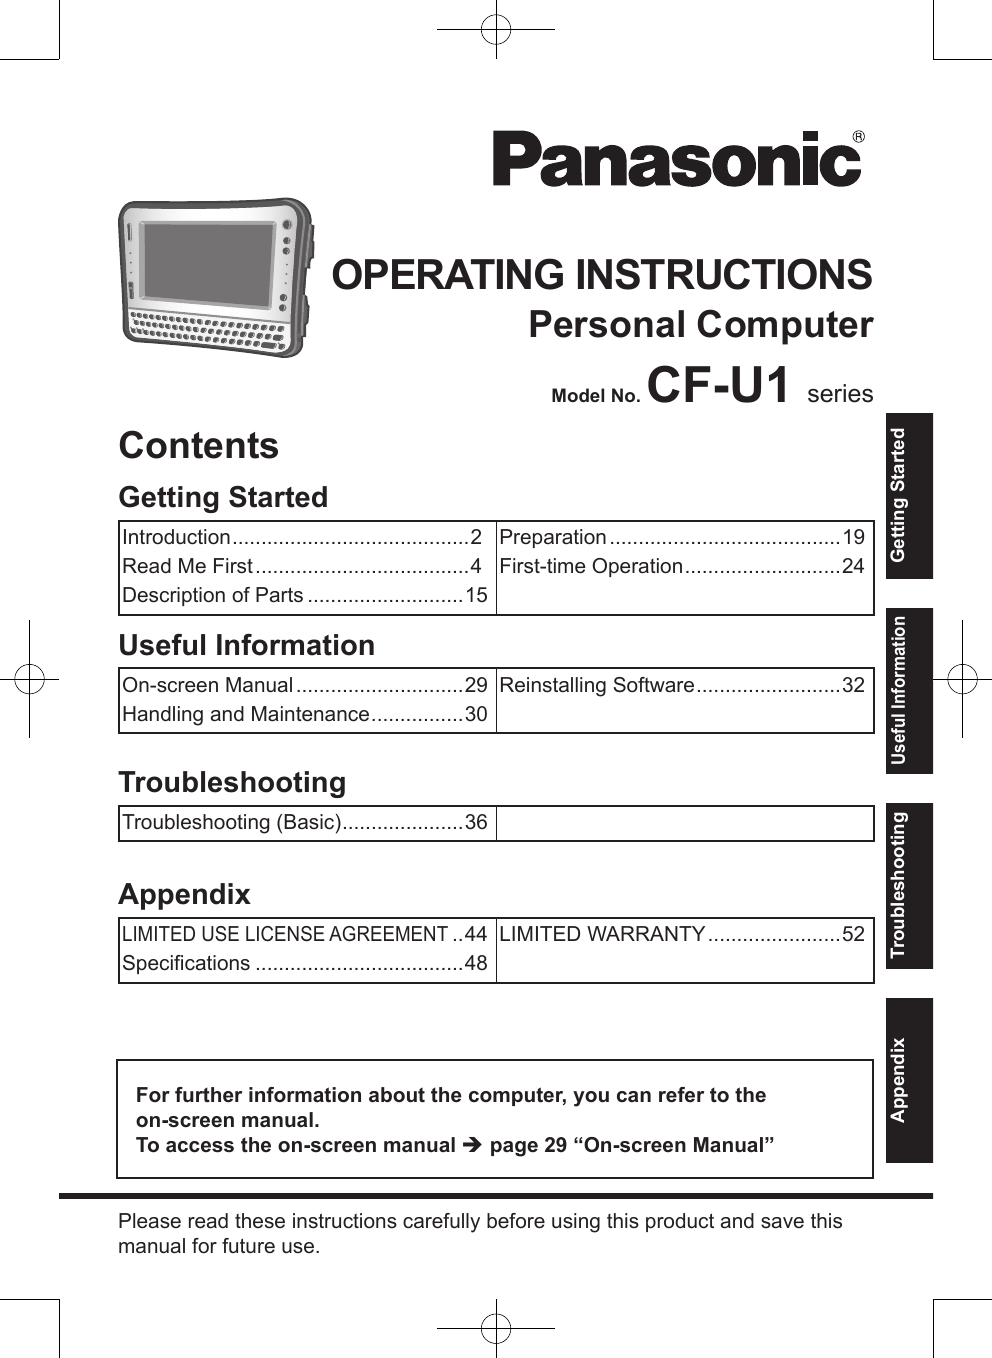 OPERATING INSTRUCTIONSPersonal ComputerModel No. CF-U1 seriesFor further information about the computer, you can refer to the  on-screen manual.To access the on-screen manual  page 29 “On-screen Manual”Please read these instructions carefully before using this product and save this manual for future use.AppendixLIMITED USE LICENSE AGREEMENT ..44Speciﬁcations ....................................48LIMITED WARRANTY .......................52TroubleshootingTroubleshooting (Basic) .....................36Useful InformationOn-screen Manual .............................29Handling and Maintenance ................30Reinstalling Software .........................32Getting StartedIntroduction .........................................2Read Me First .....................................4Description of Parts ...........................15Preparation ........................................19First-time Operation ...........................24ContentsGetting StartedUseful InformationTroubleshootingAppendix